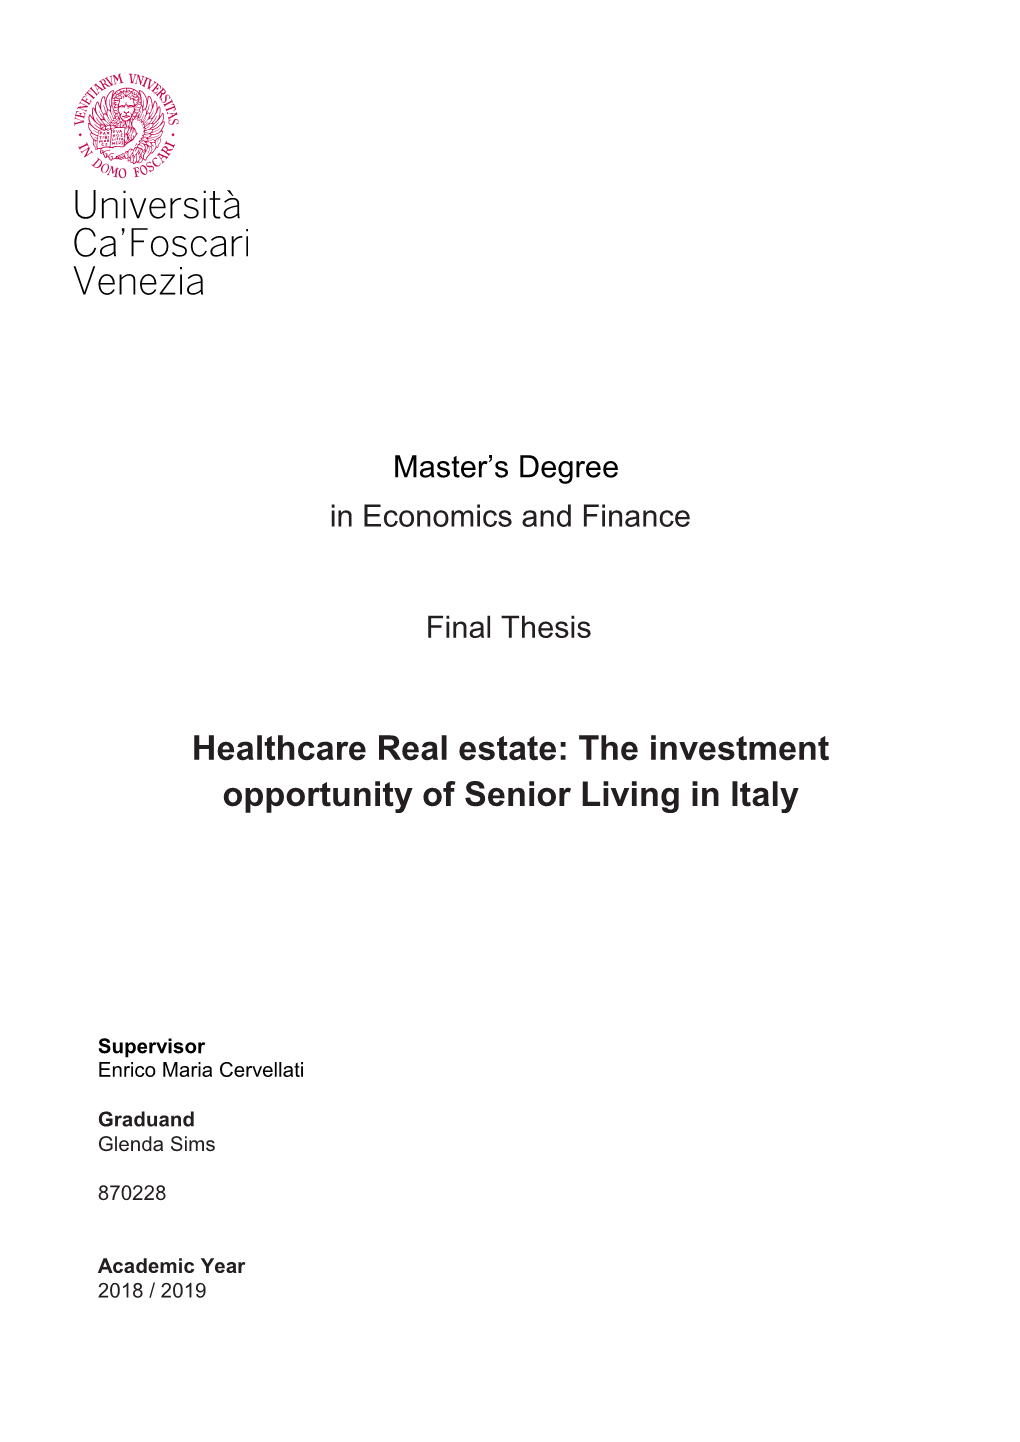 Healthcare Real Estate: the Investment Opportunity of Senior Living in Italy